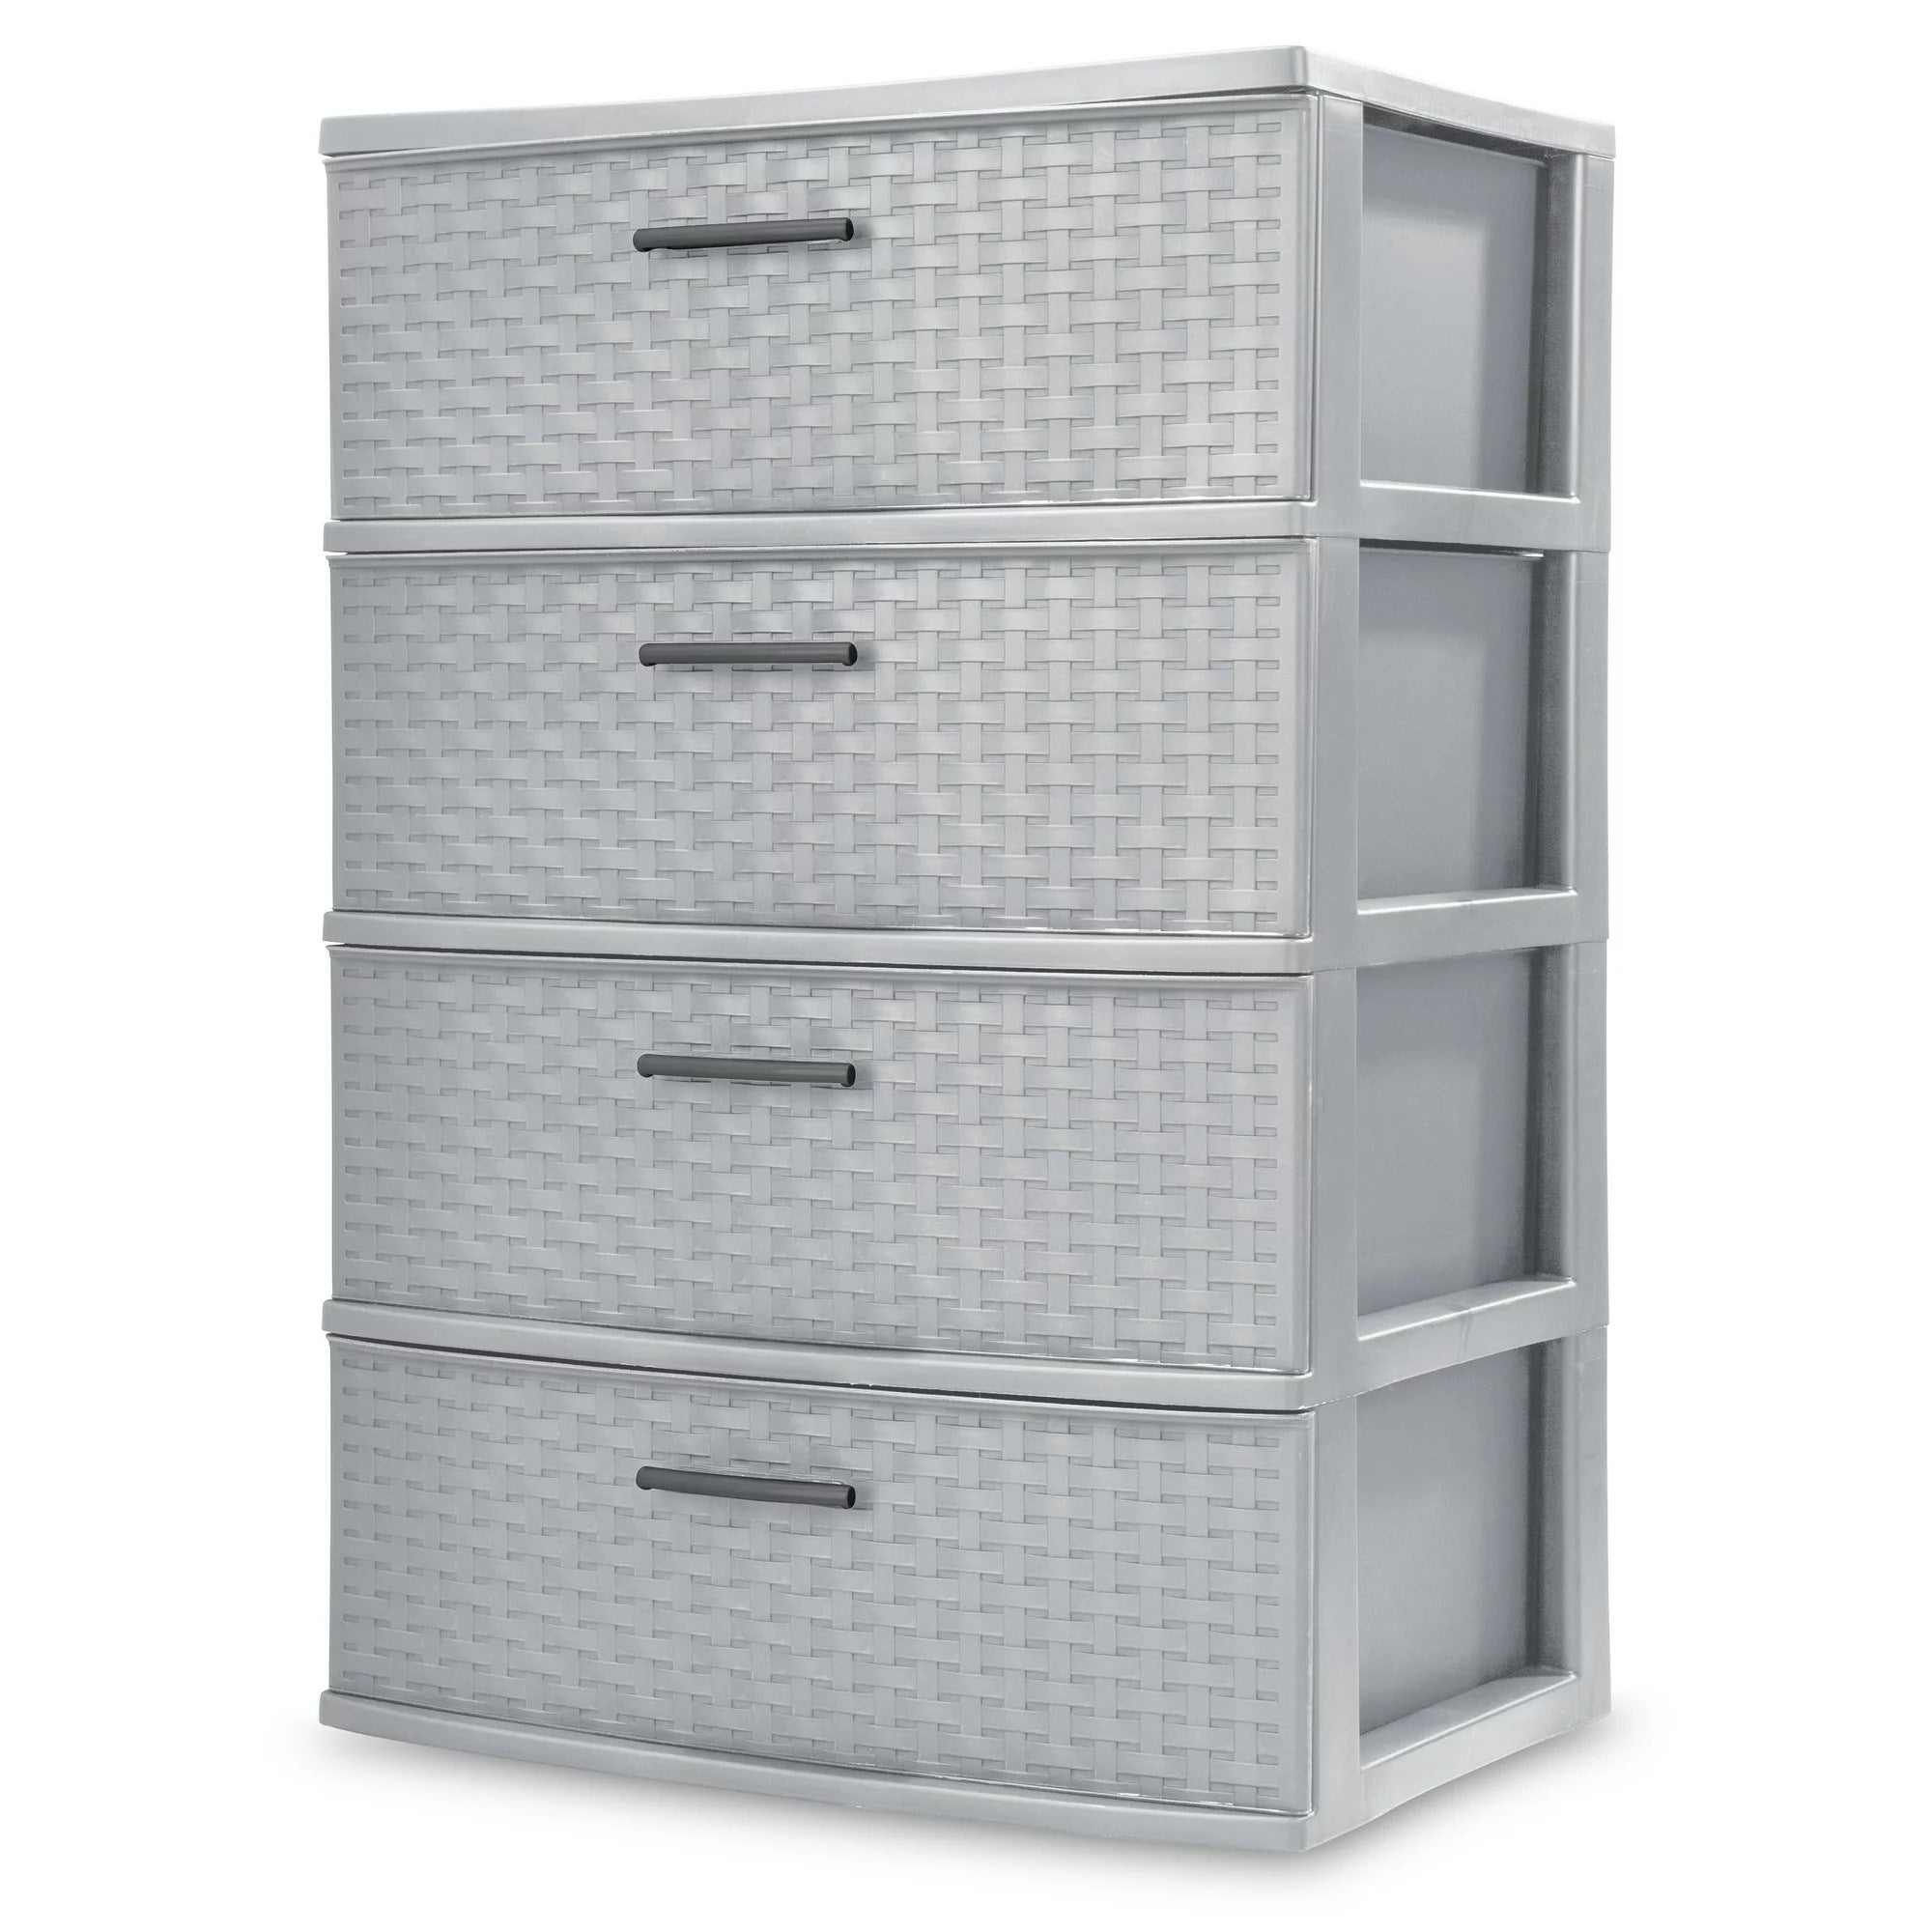 A woven 4 drawer wide weave tower decoration storage cabinet with gray drawers.